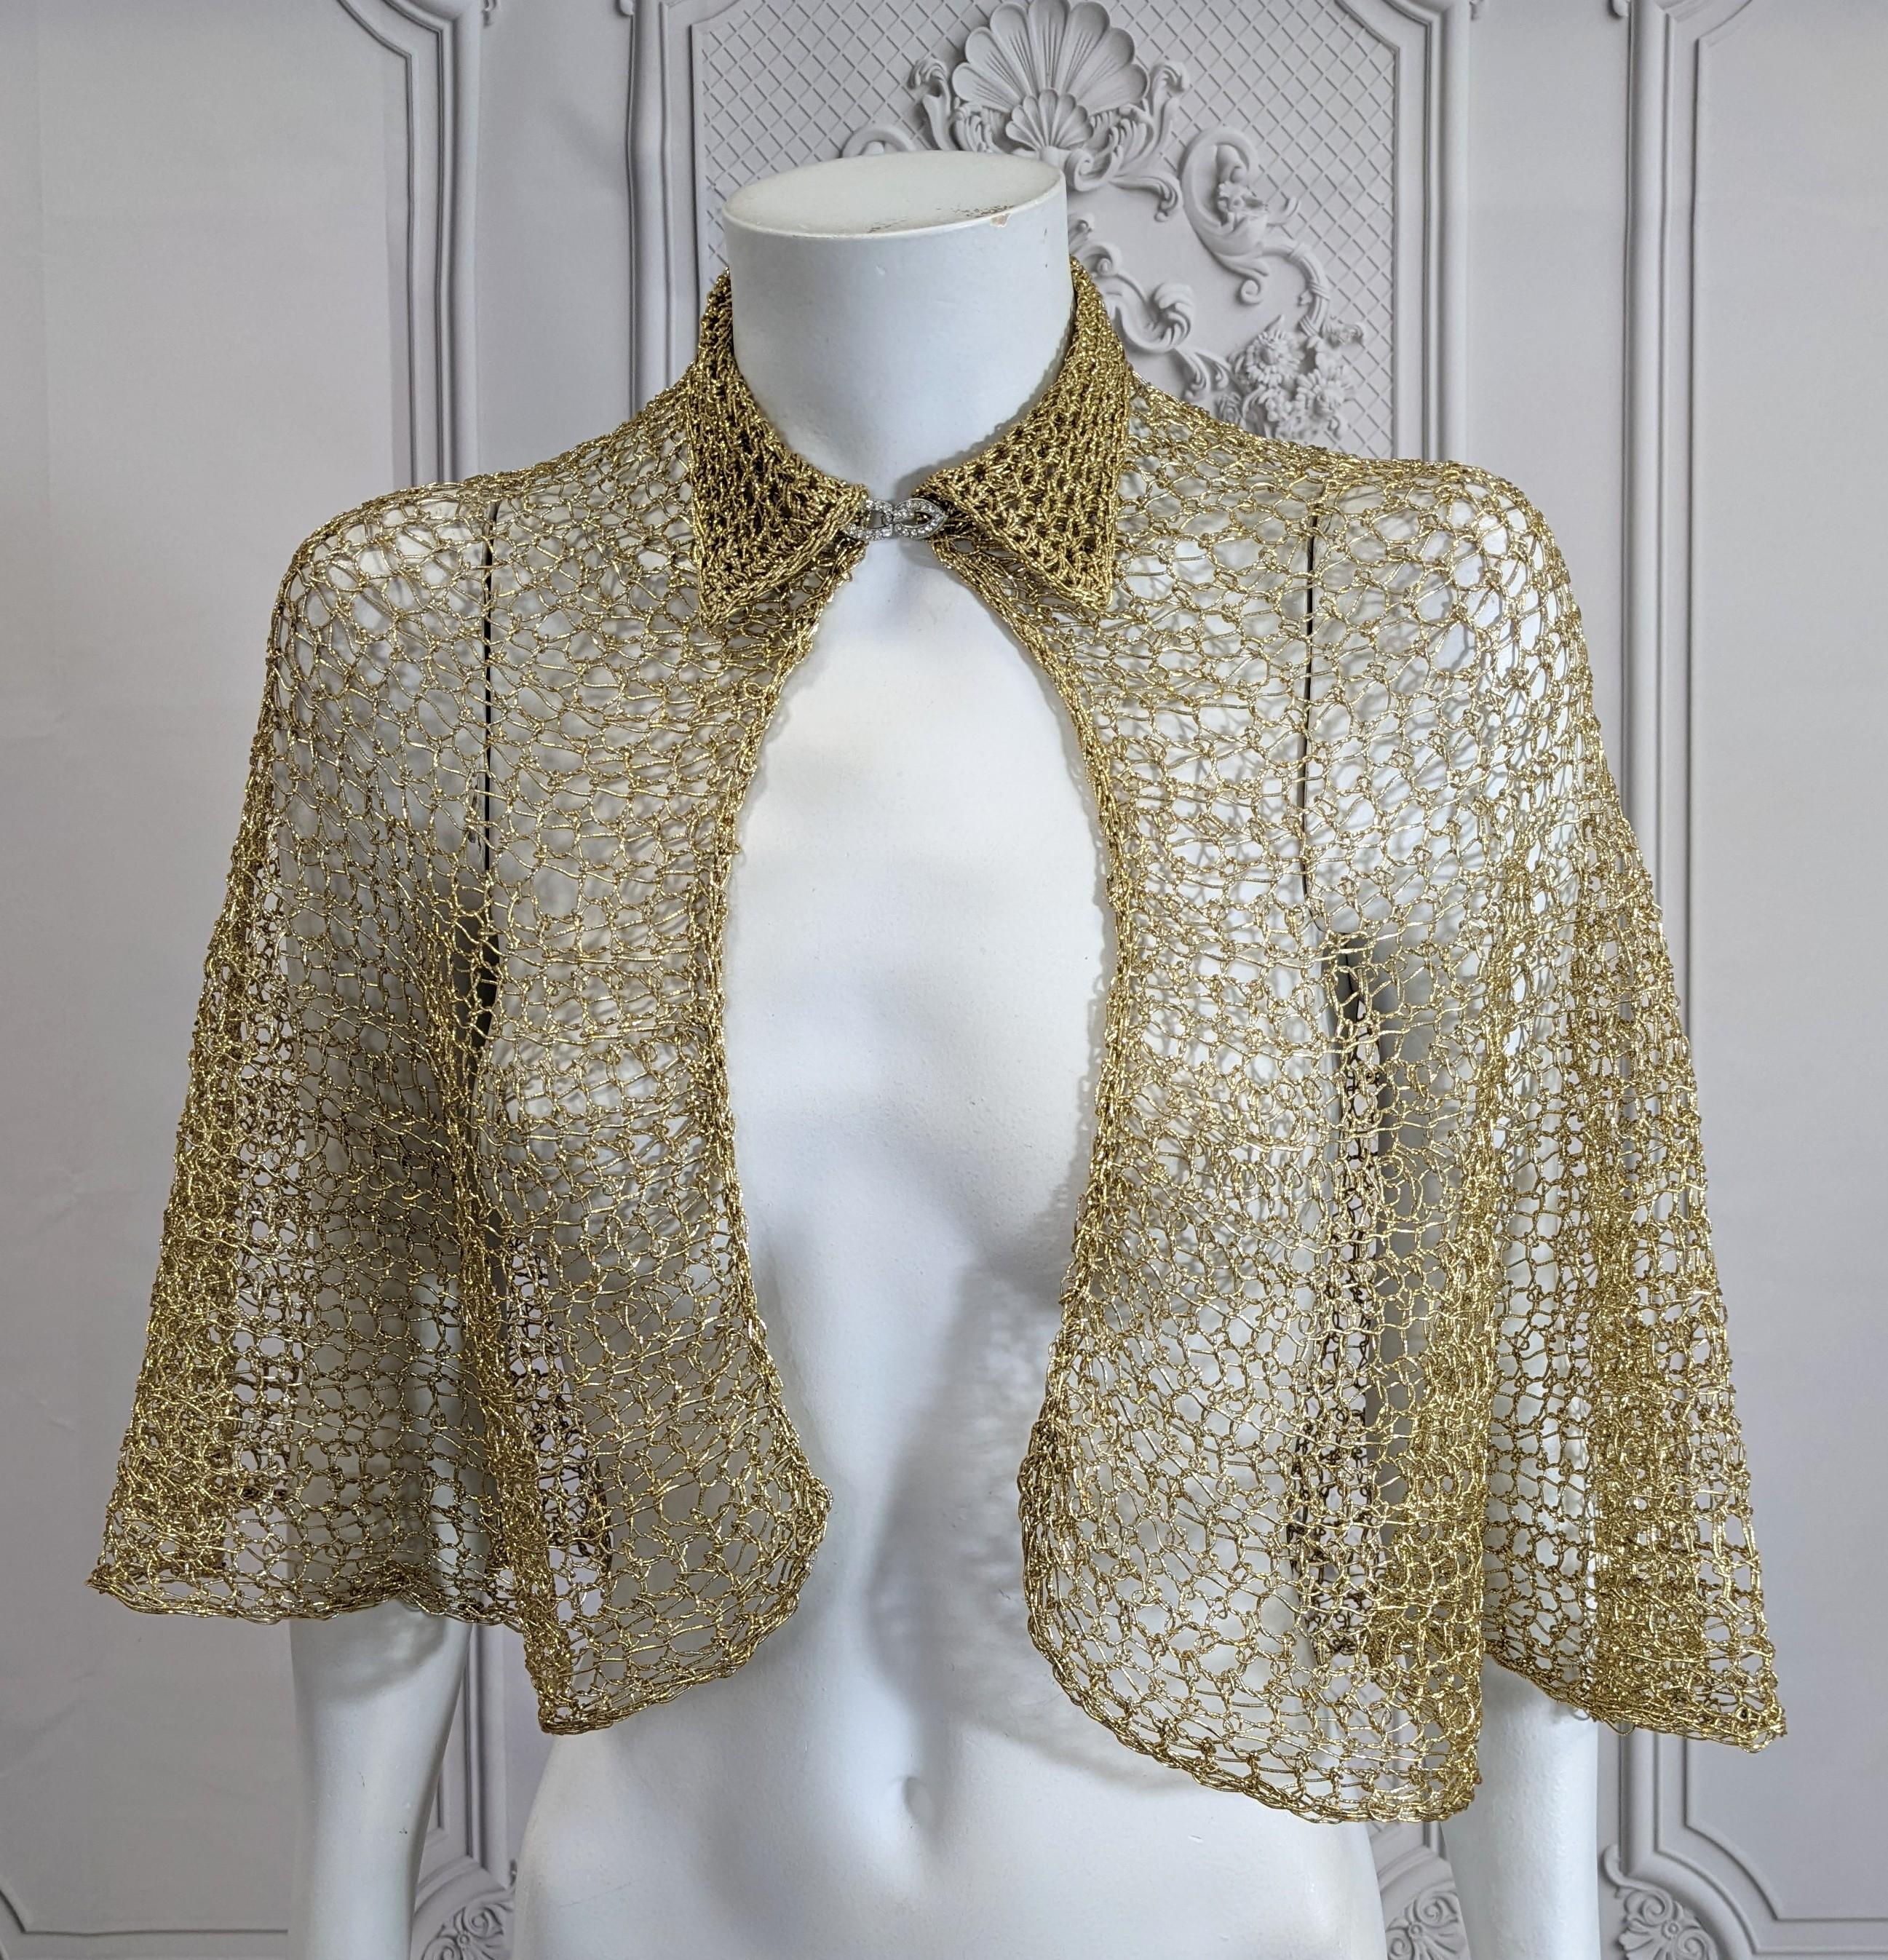 Elegant and versatile Art Deco Hand Crochet Gold Yarn Capelet from the 1930's with pave Deco clasp. Hand crochet in circular pattern in an open work web.
Small neck size, 13.00